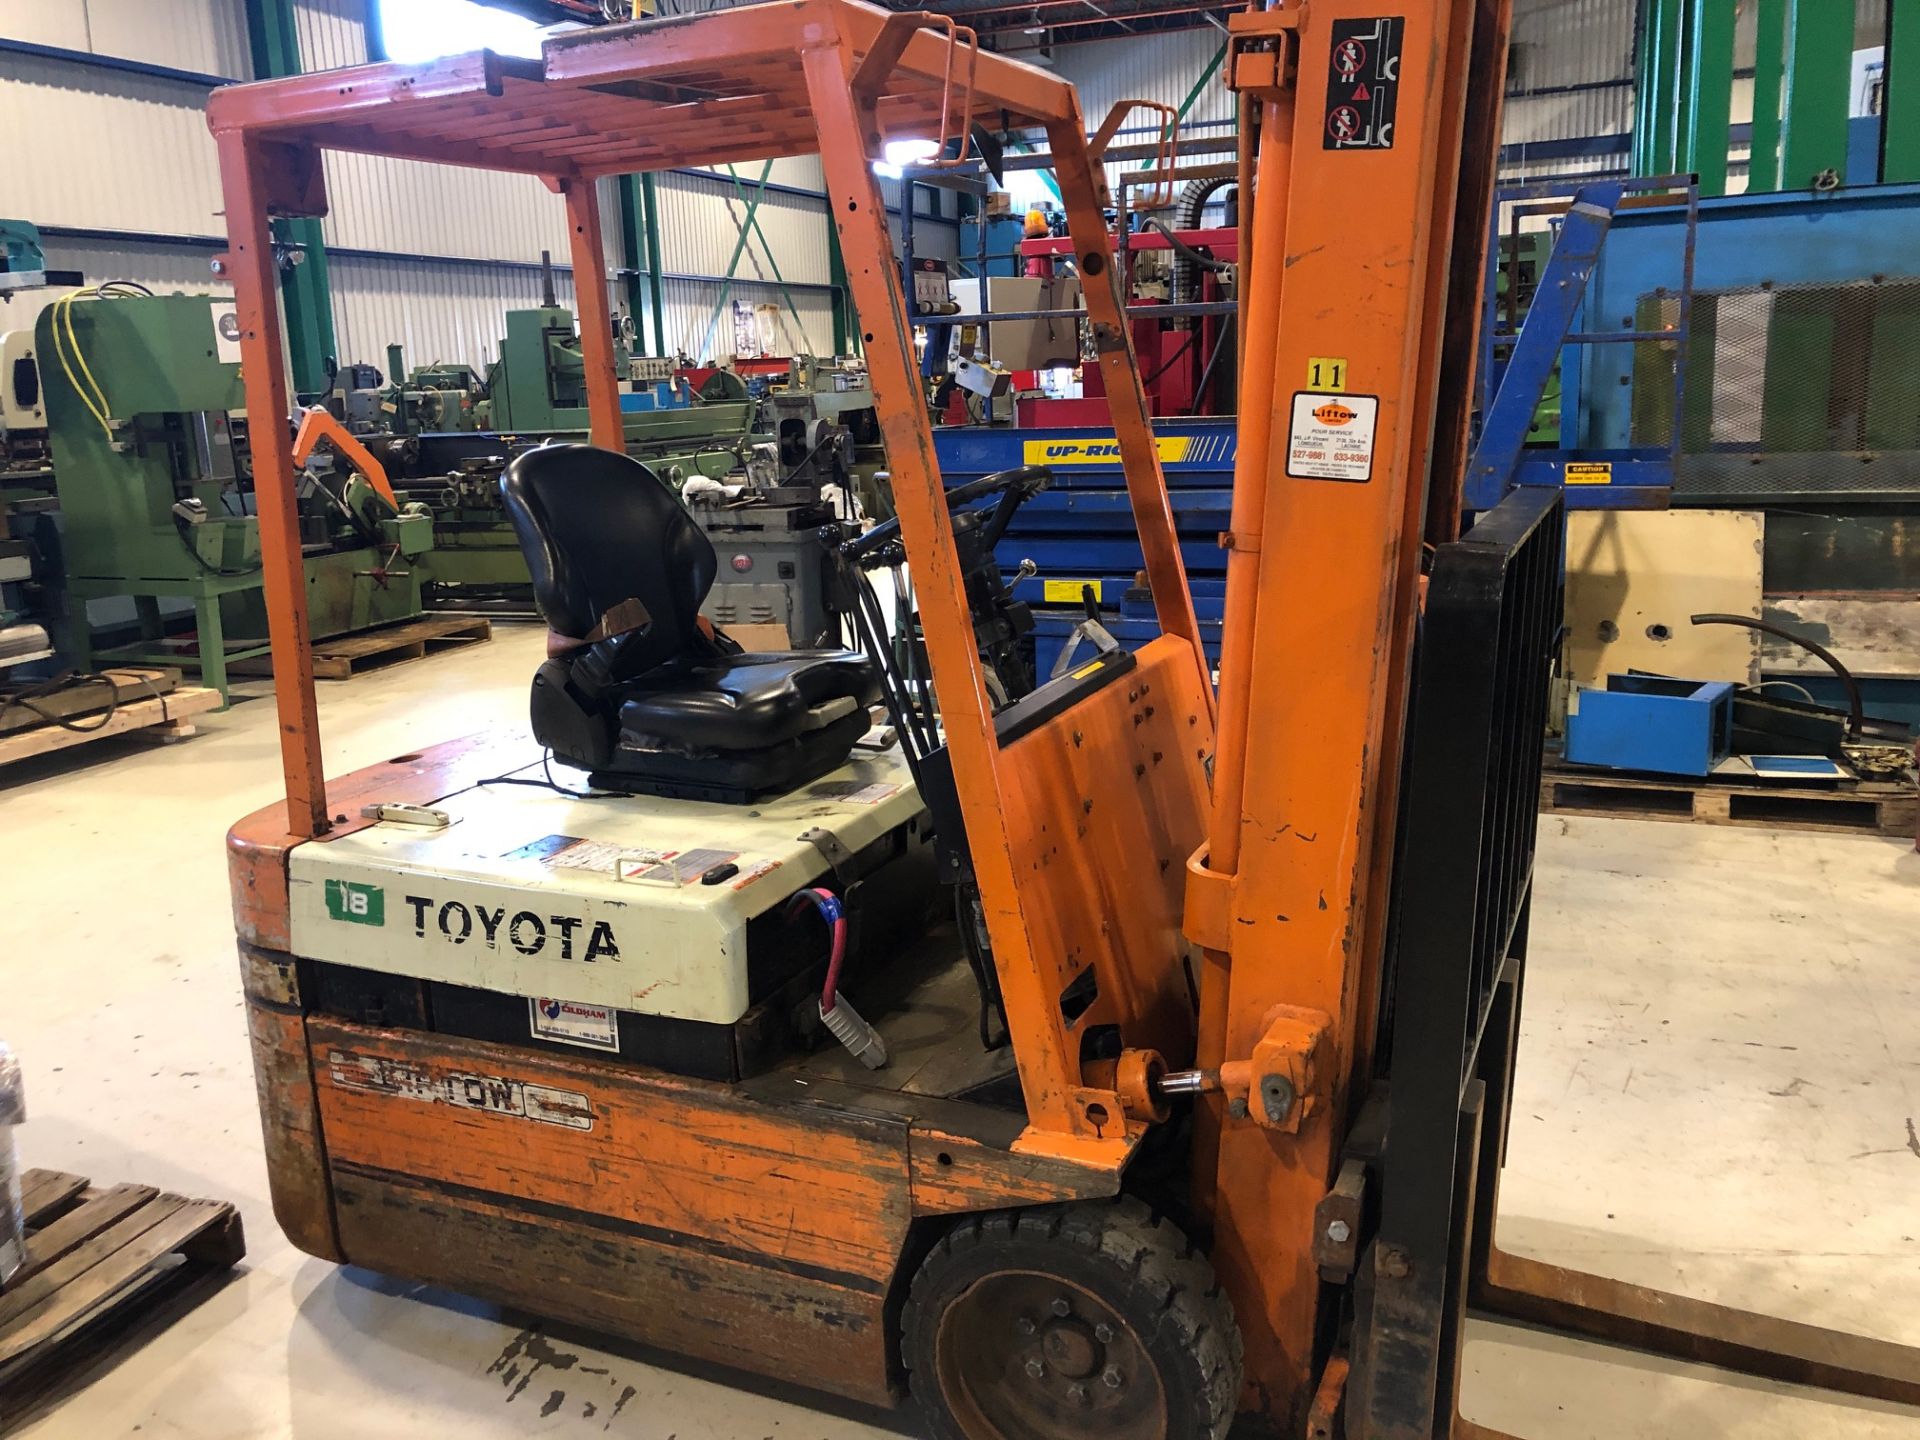 TOYOTA ELECTRIC FORKLIFT MOD. 2FBEC18, 2800 LBS CAP., SIDE SHIFT, 185” LIFT - Image 4 of 7